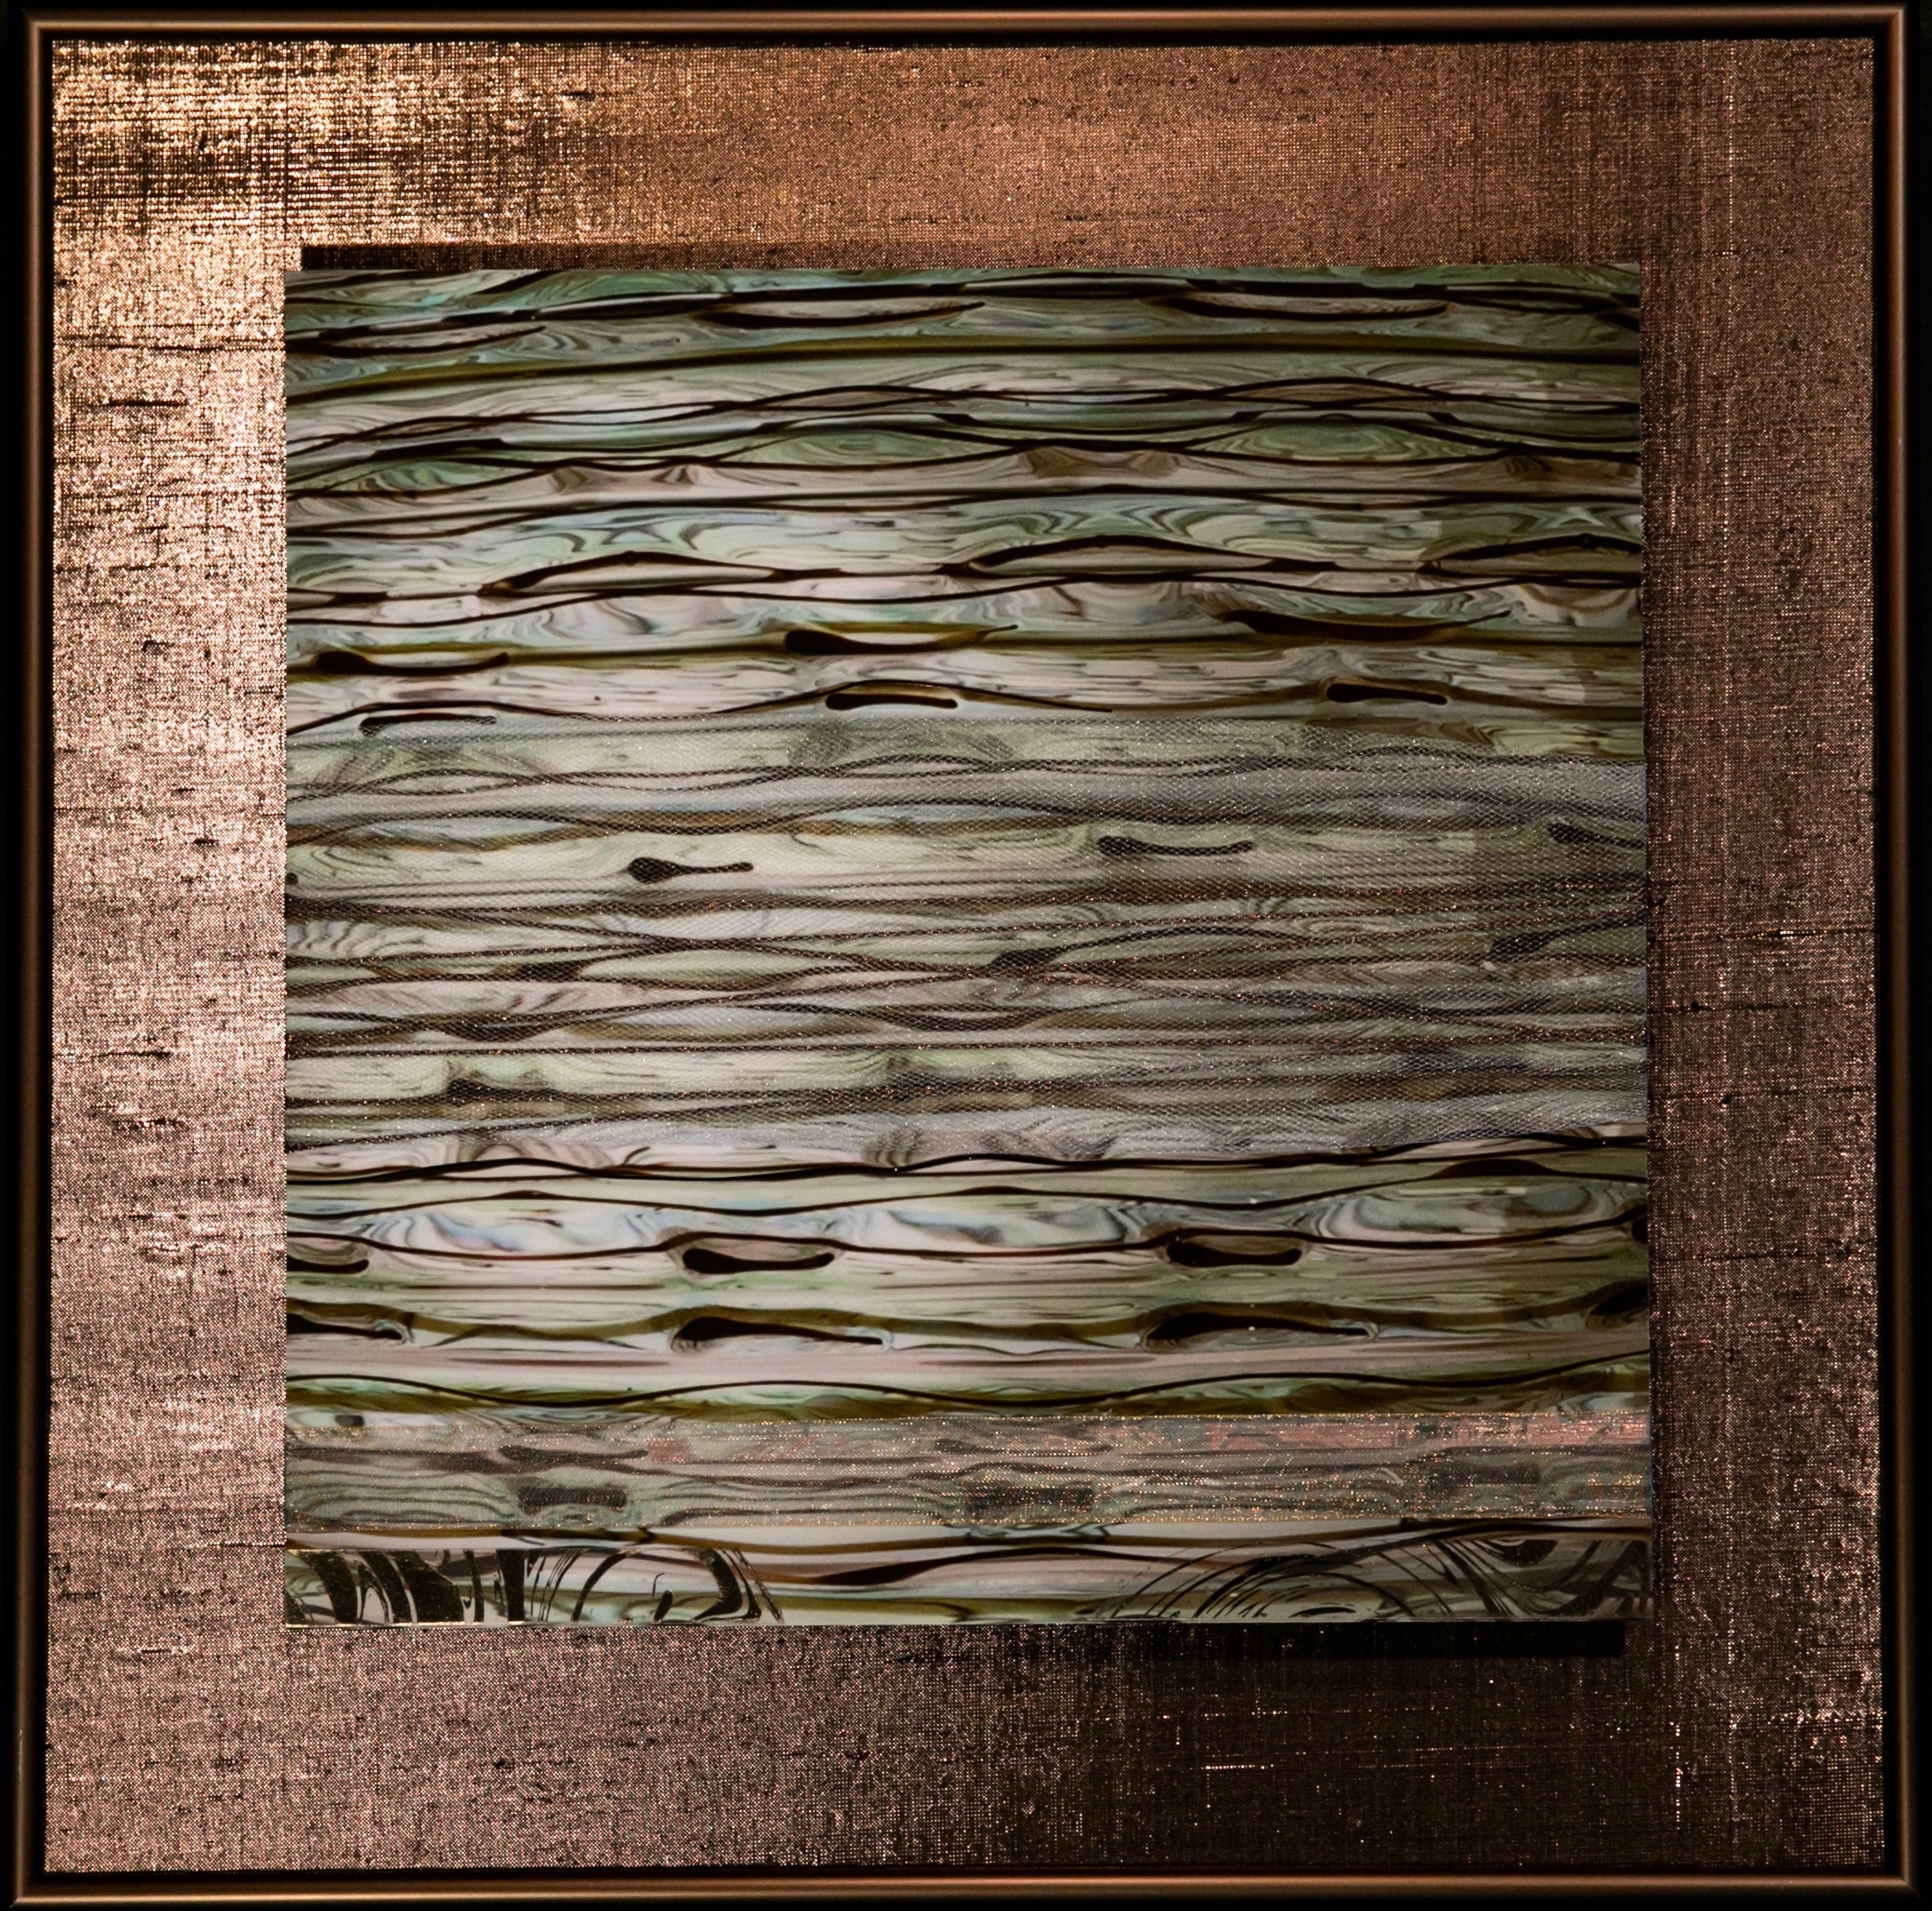   Wavecapes Series    Sinuous I   14” Sq.  Metal Print with Silks  2018 